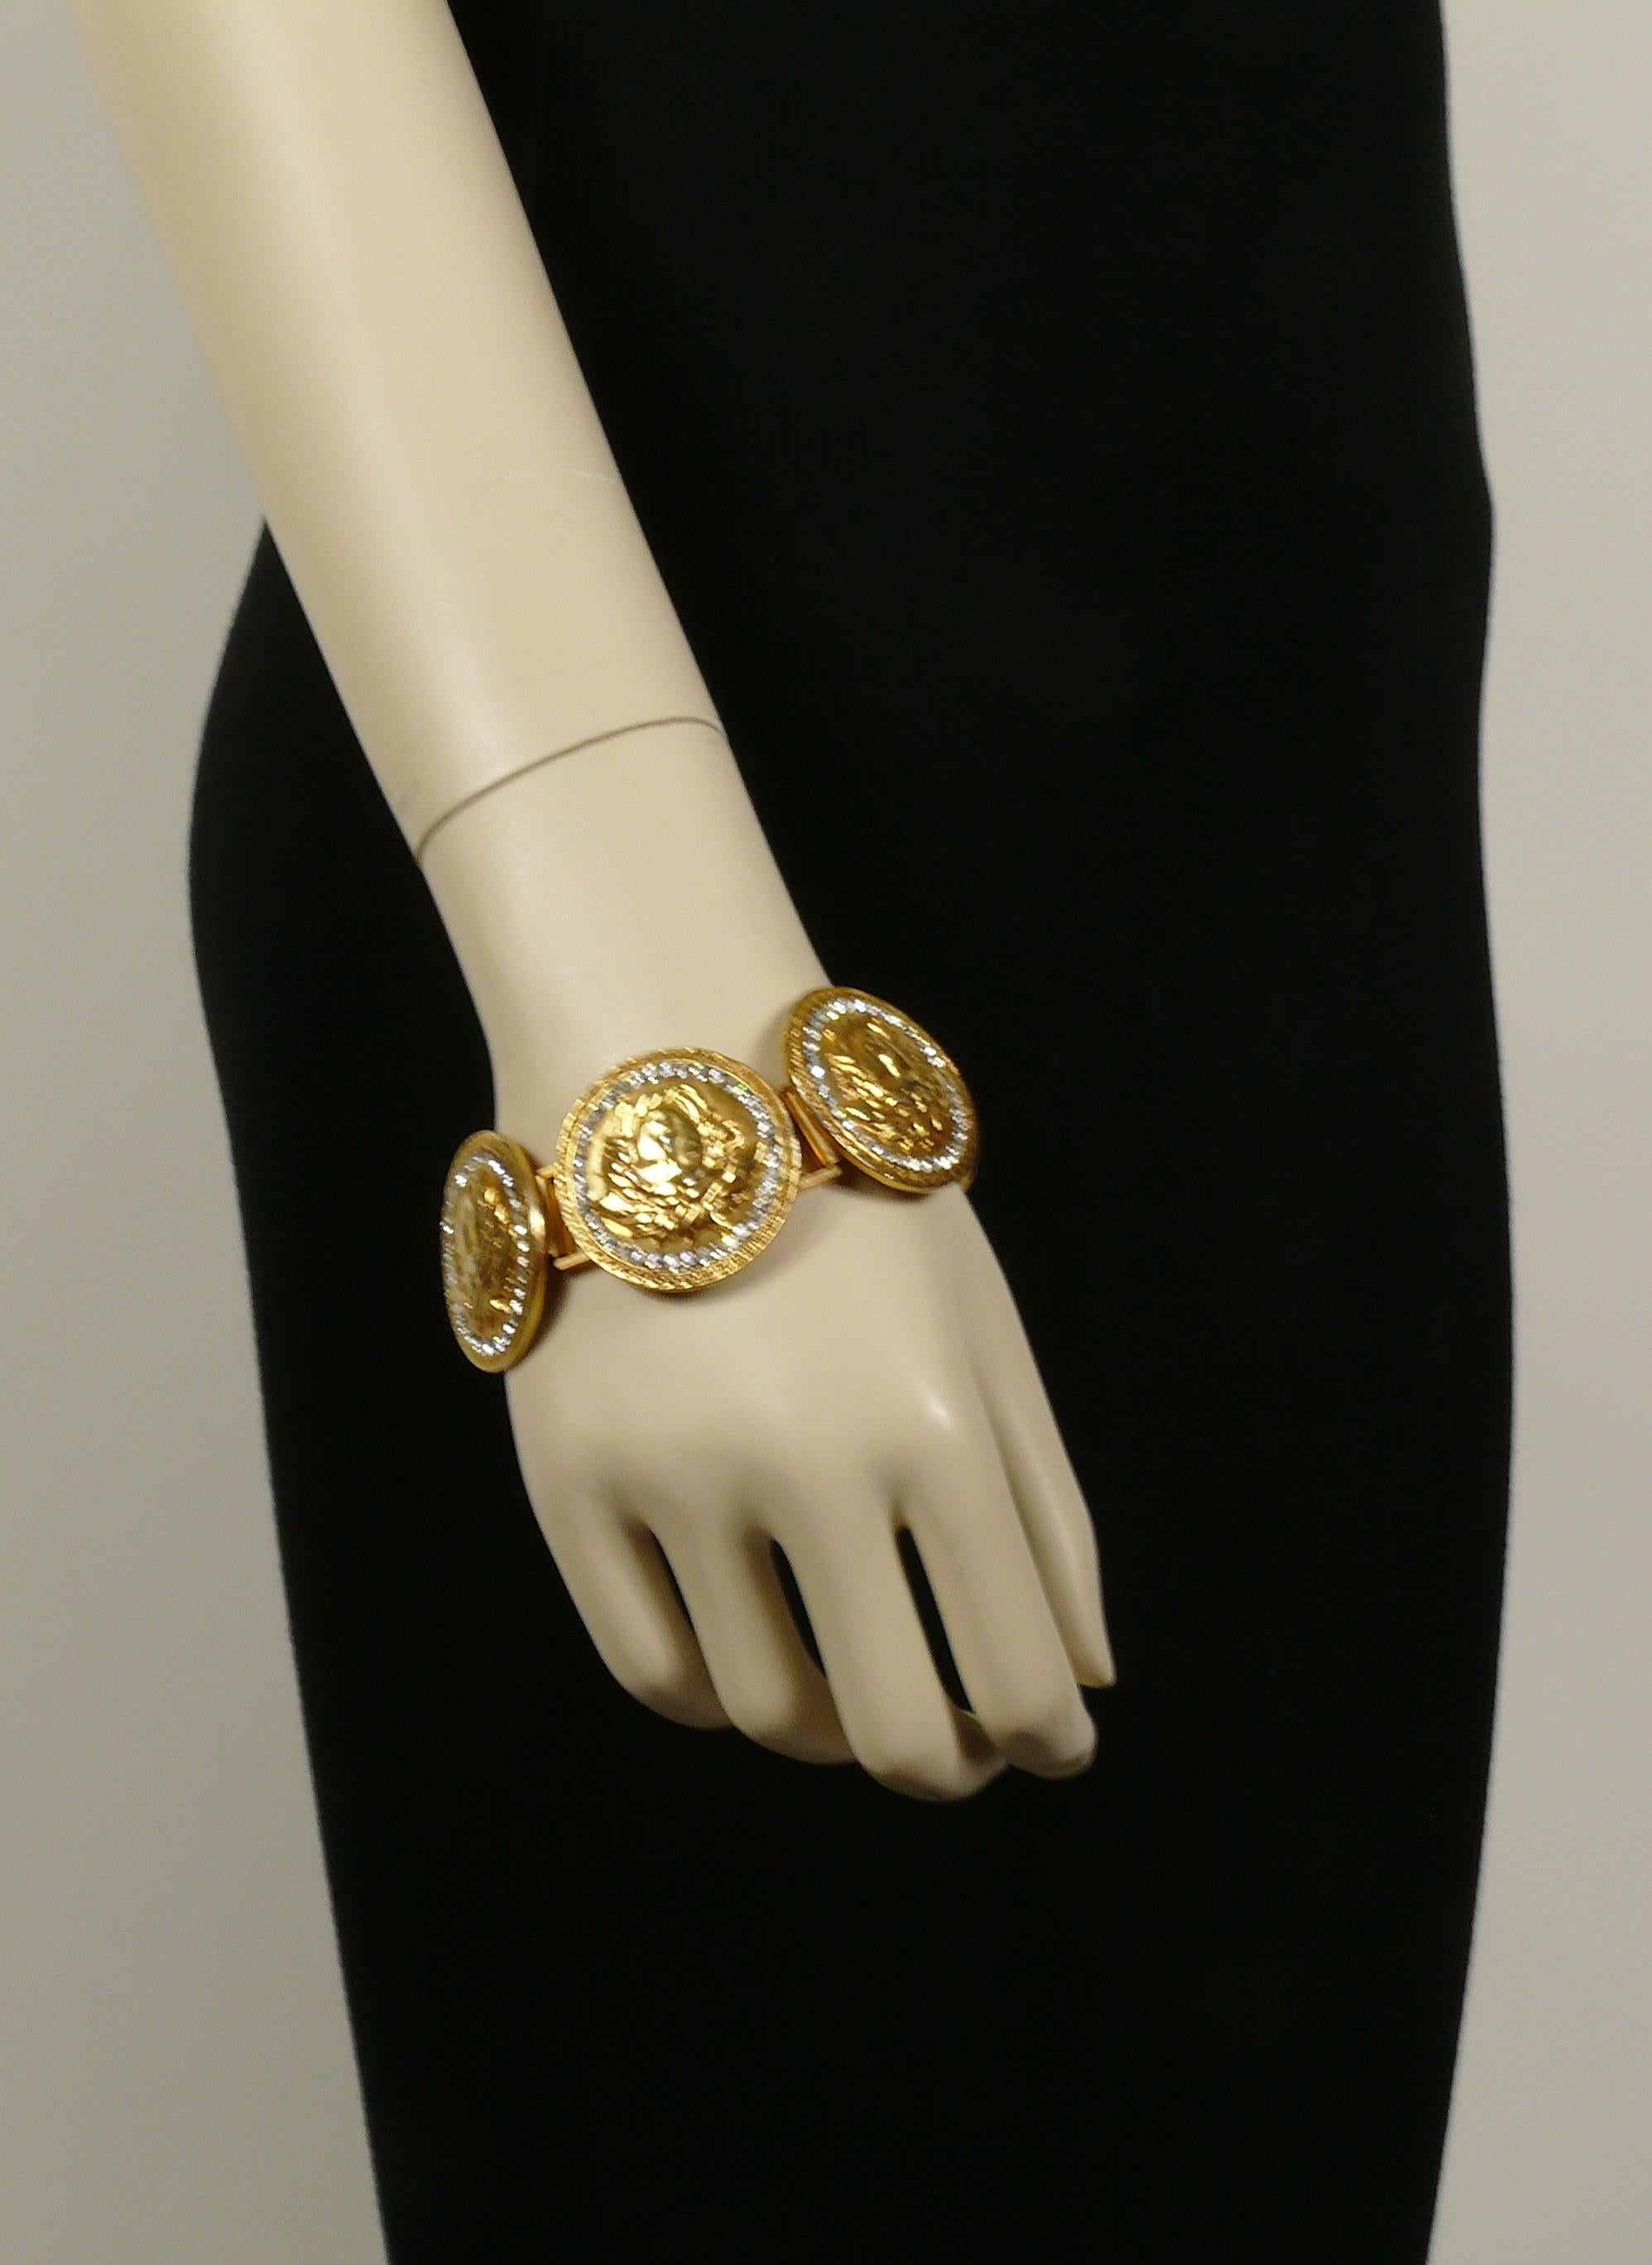 GIANNI VERSACE vintage iconic large gold toned Medusa links surrounded with clear crystals.

Box clasp closure.

Embossed GIANNI VERSACE Made in Italy.

Indicative measurements : length approx. 19.5 cm (7.68 inches) / links diameter approx. 3.4 cm